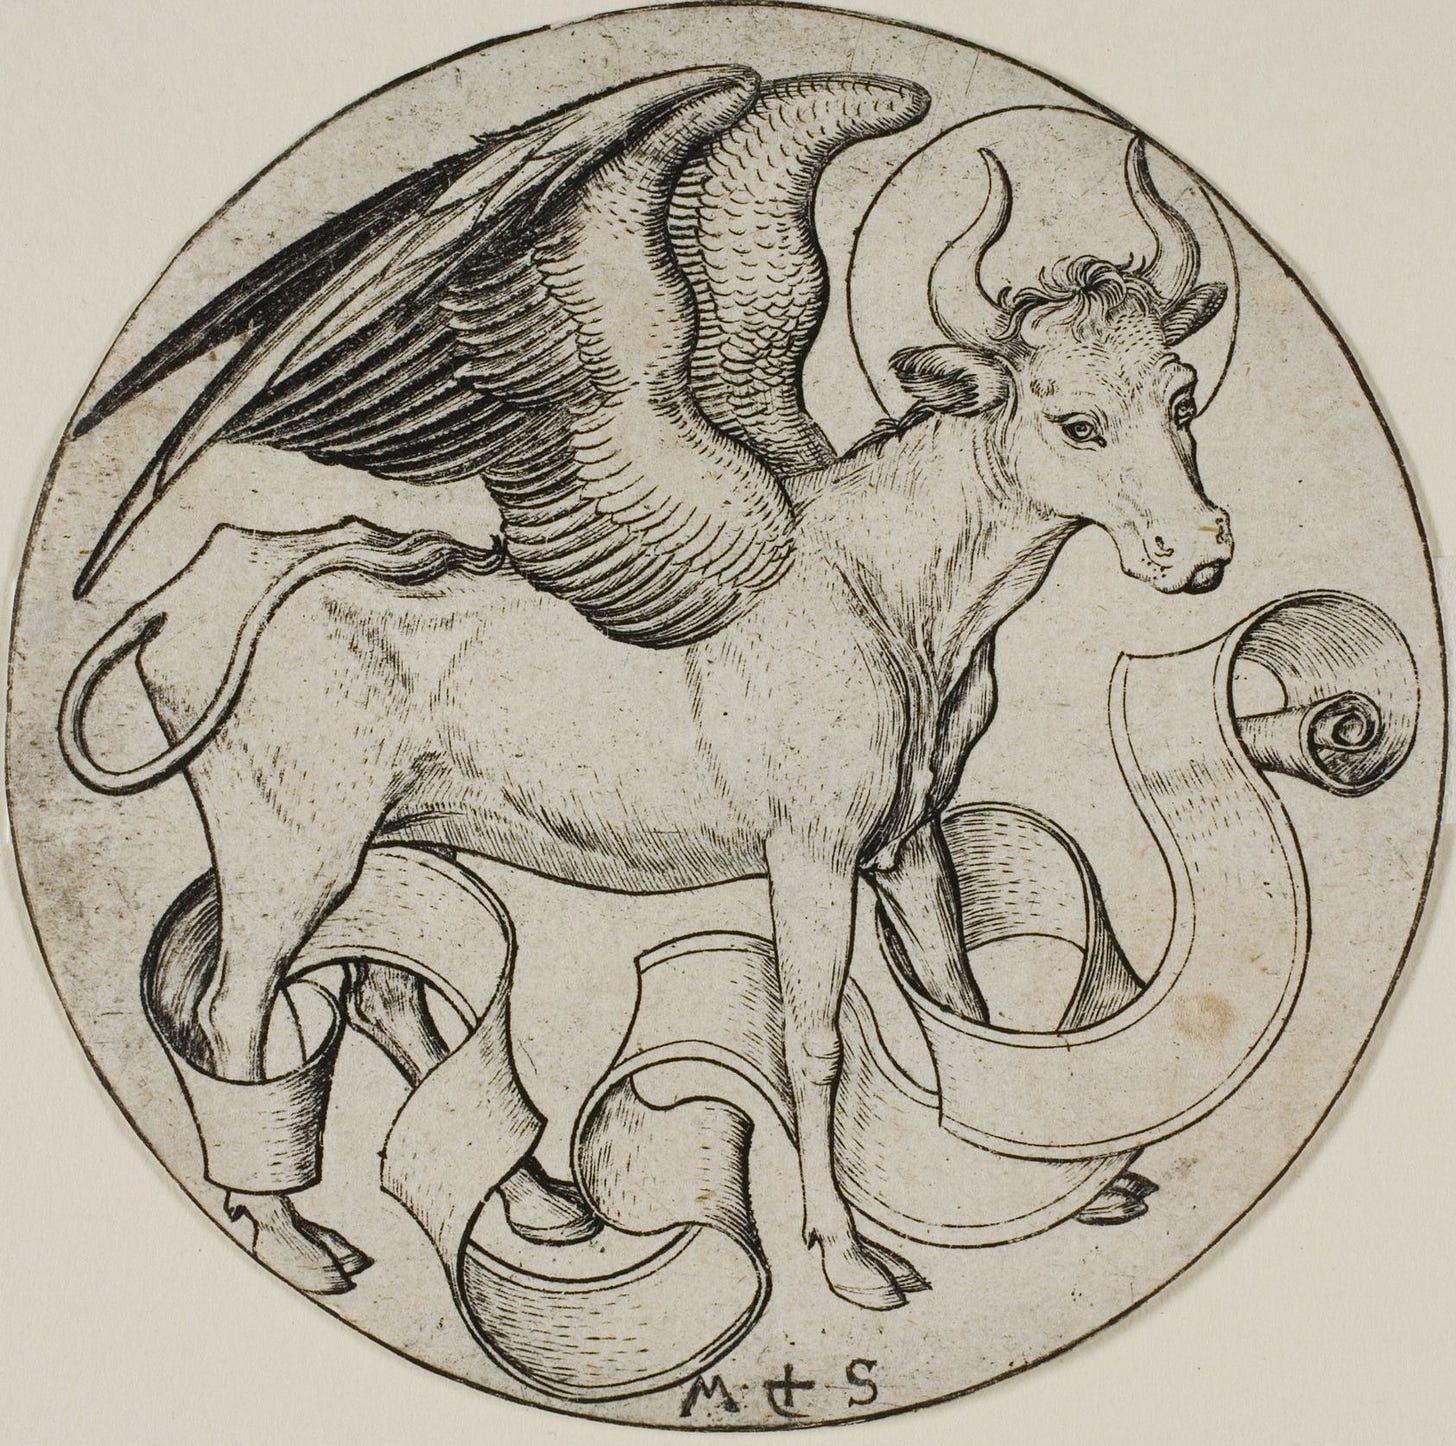 St. Luke the ox, and governing power